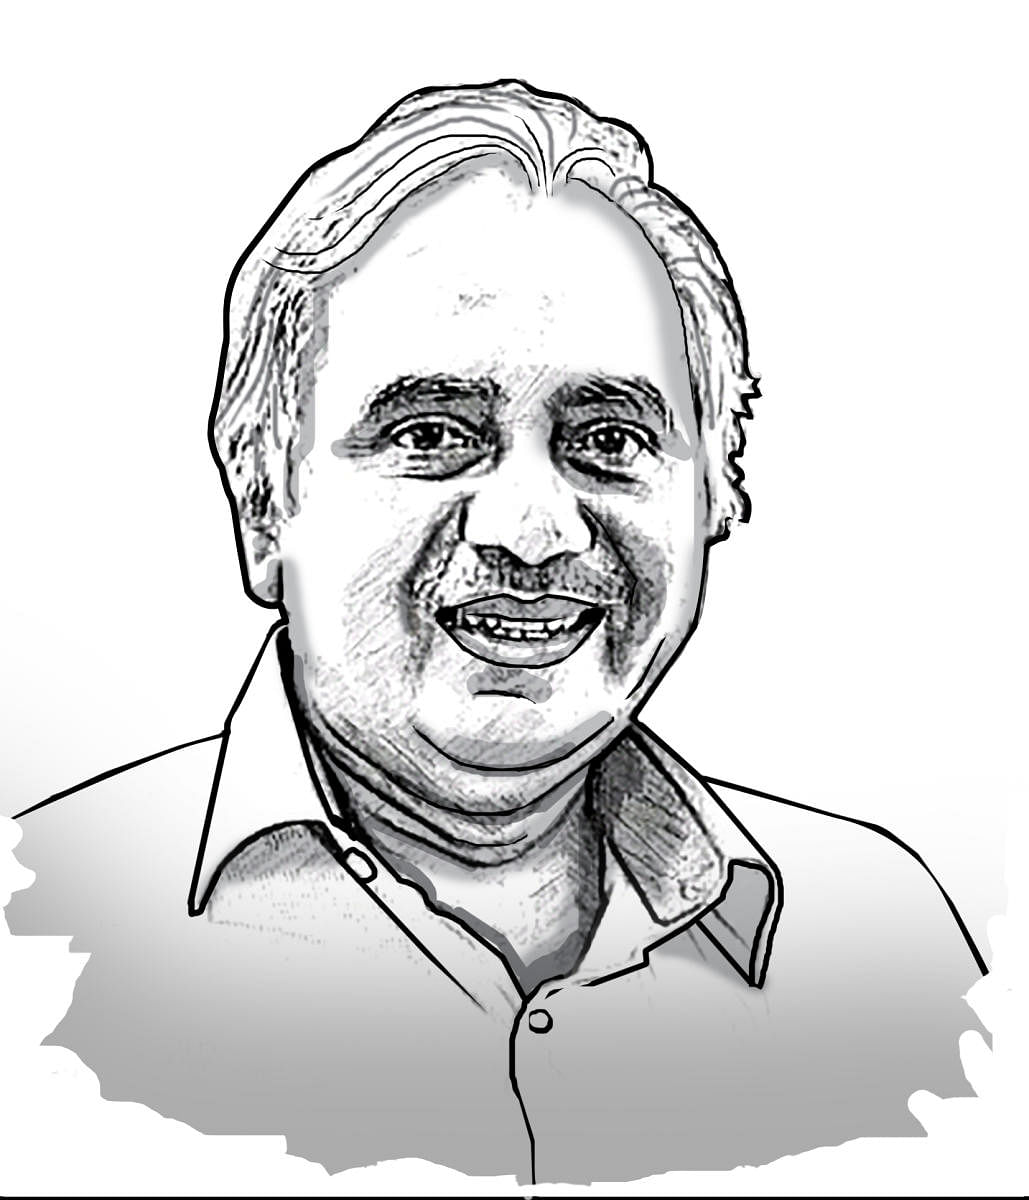 Seshadri Chari reads between the lines on big national and international developments from his vantage point in the BJP and the RSS @seshadrichari